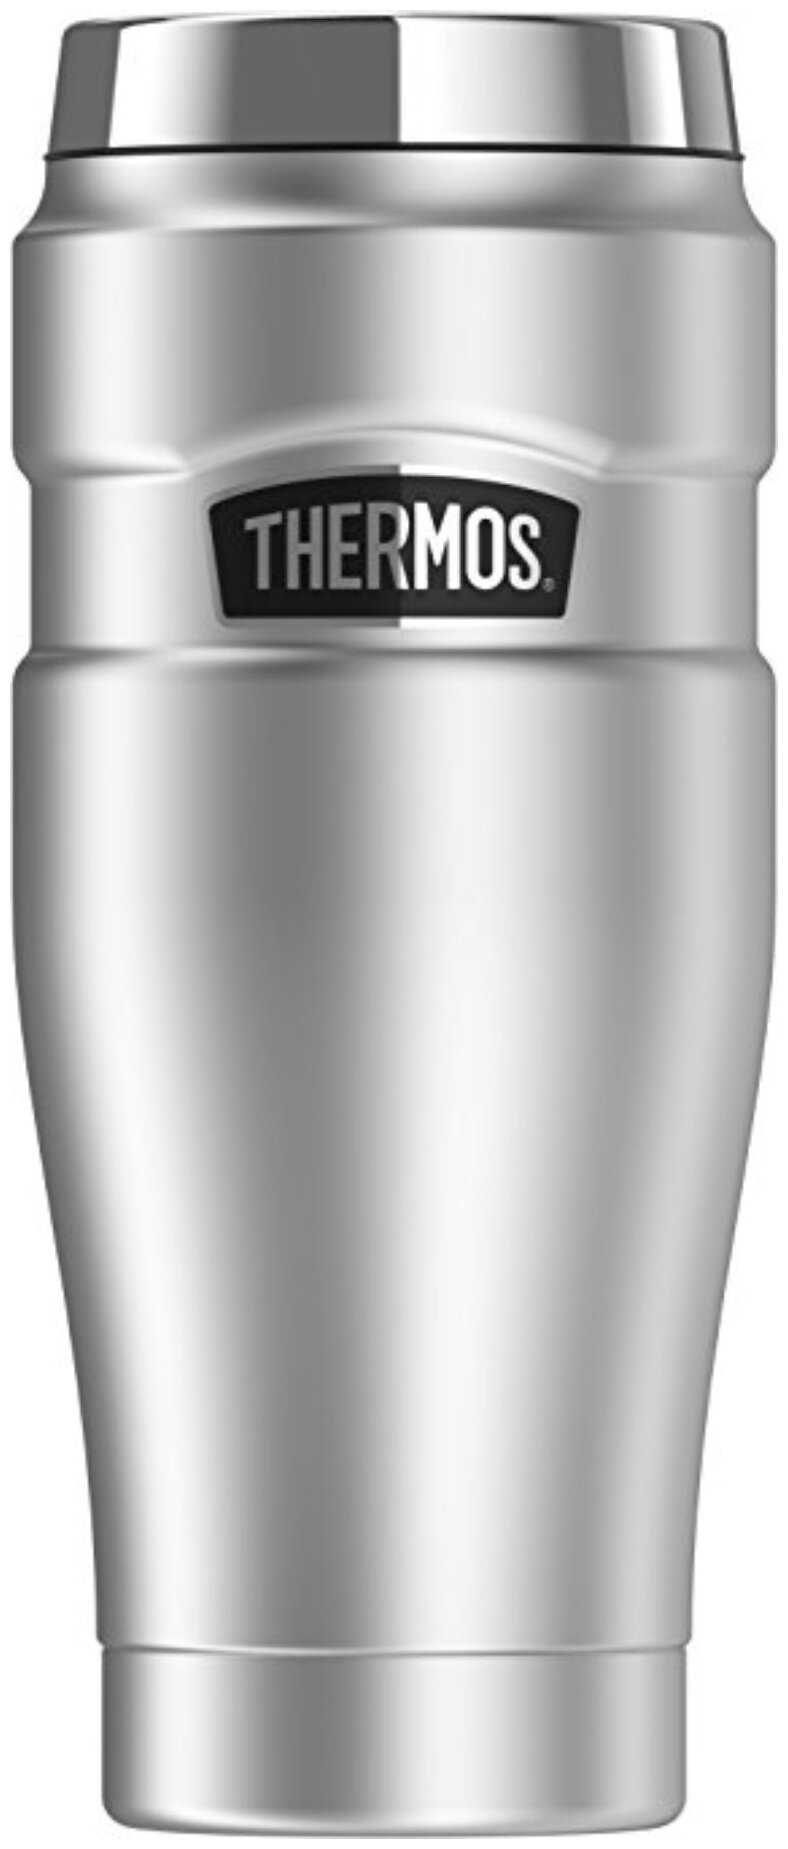    () Thermos SK-1005 MS (0,47 ),  King, 